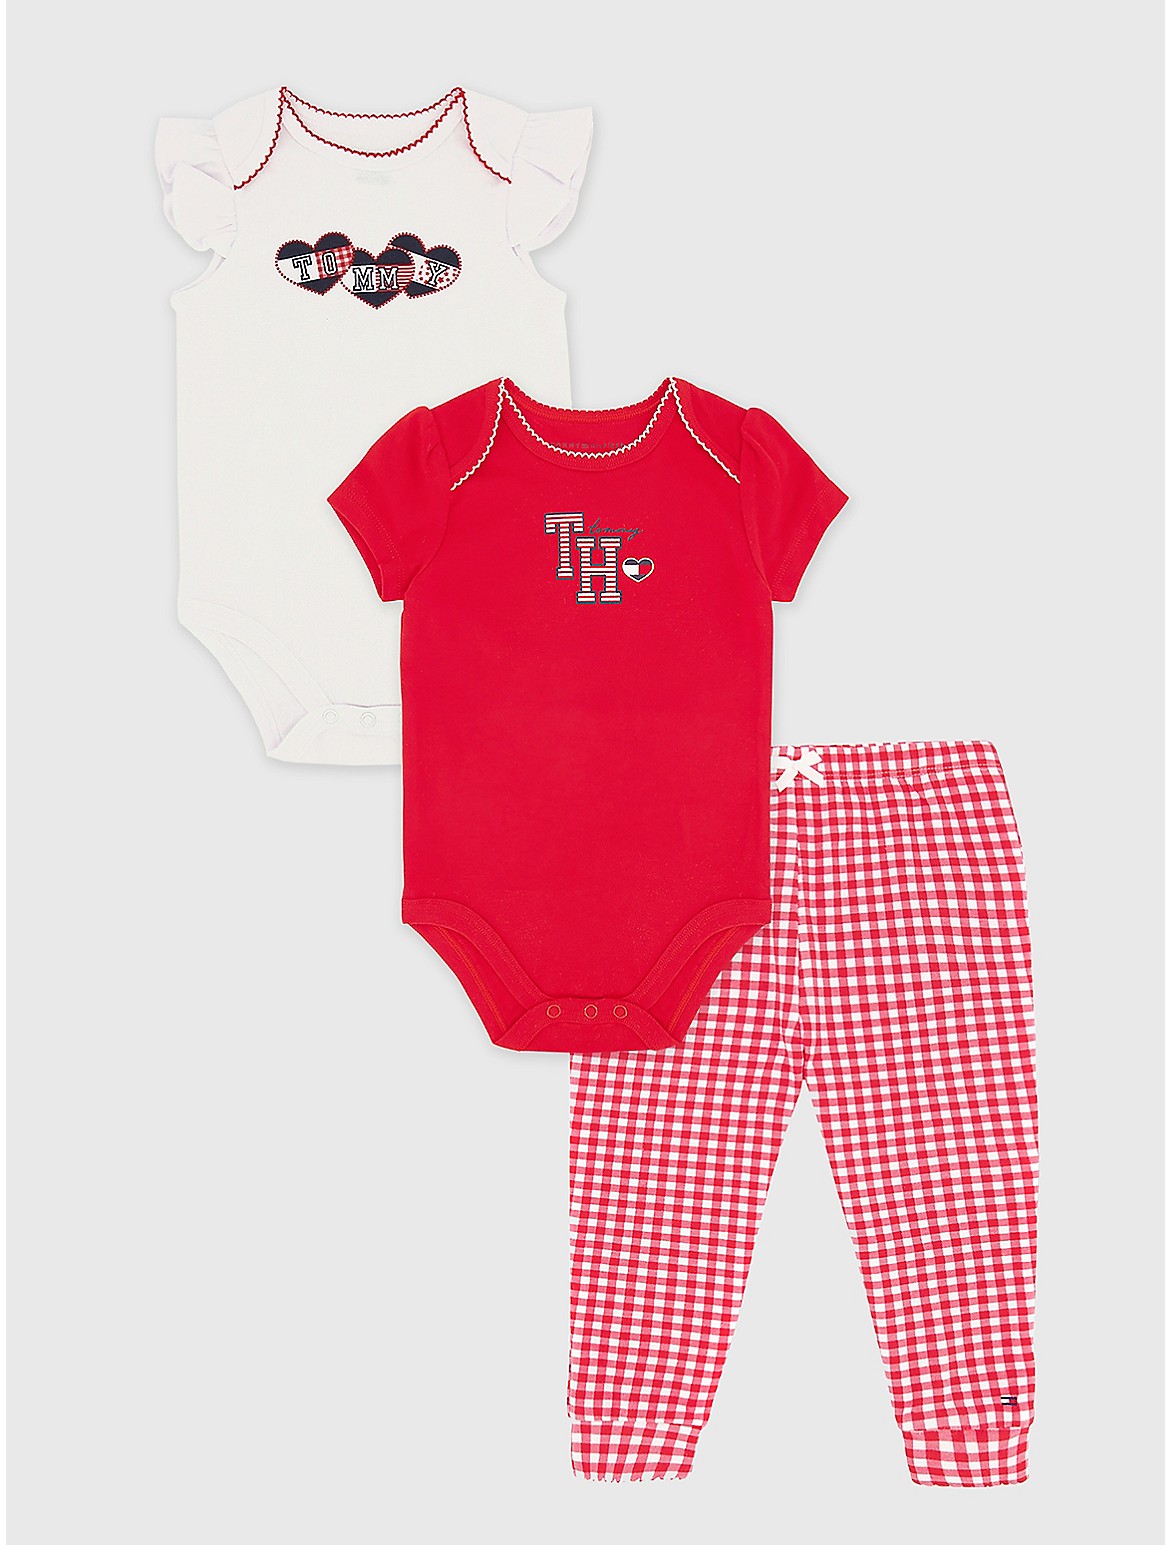 Tommy Hilfiger Girls' Babies' Onesie and Pant Set 3PC - Multi - 6-9M